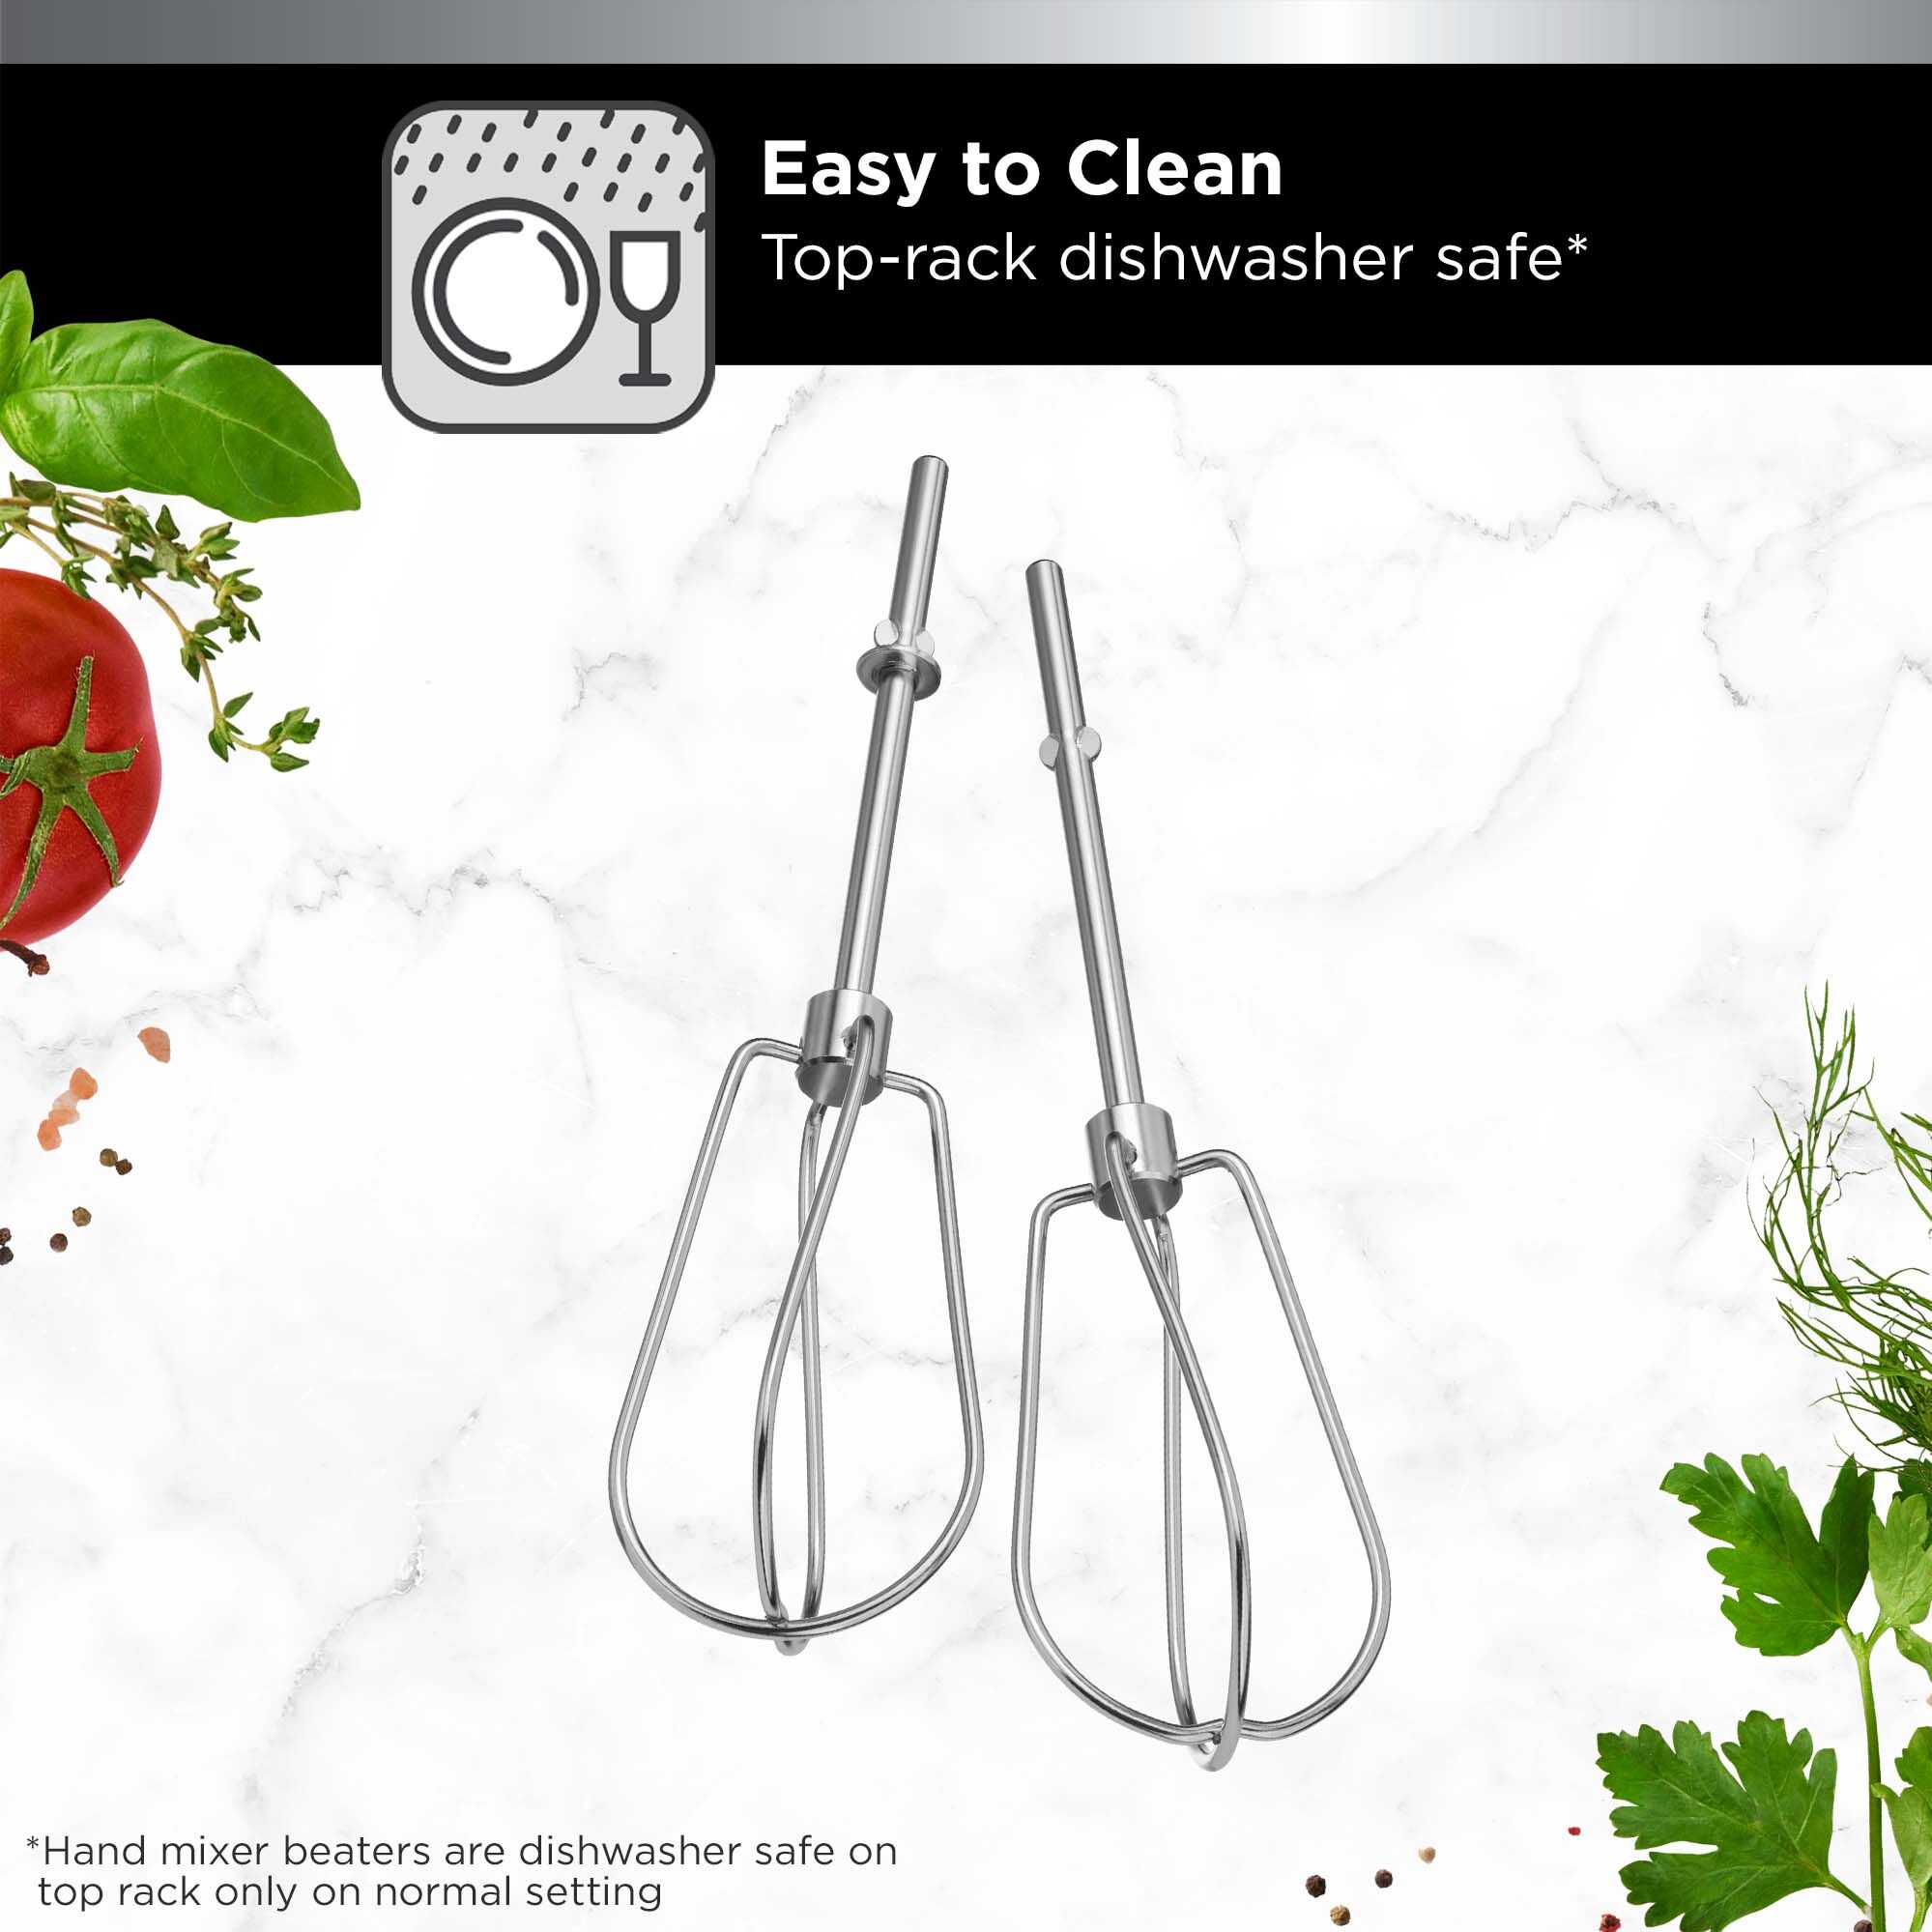 Easy to clean the BLACK+DECKER kitchen wand™ hand mixer attachment on the top-rack of your dishwasher on a normal setting